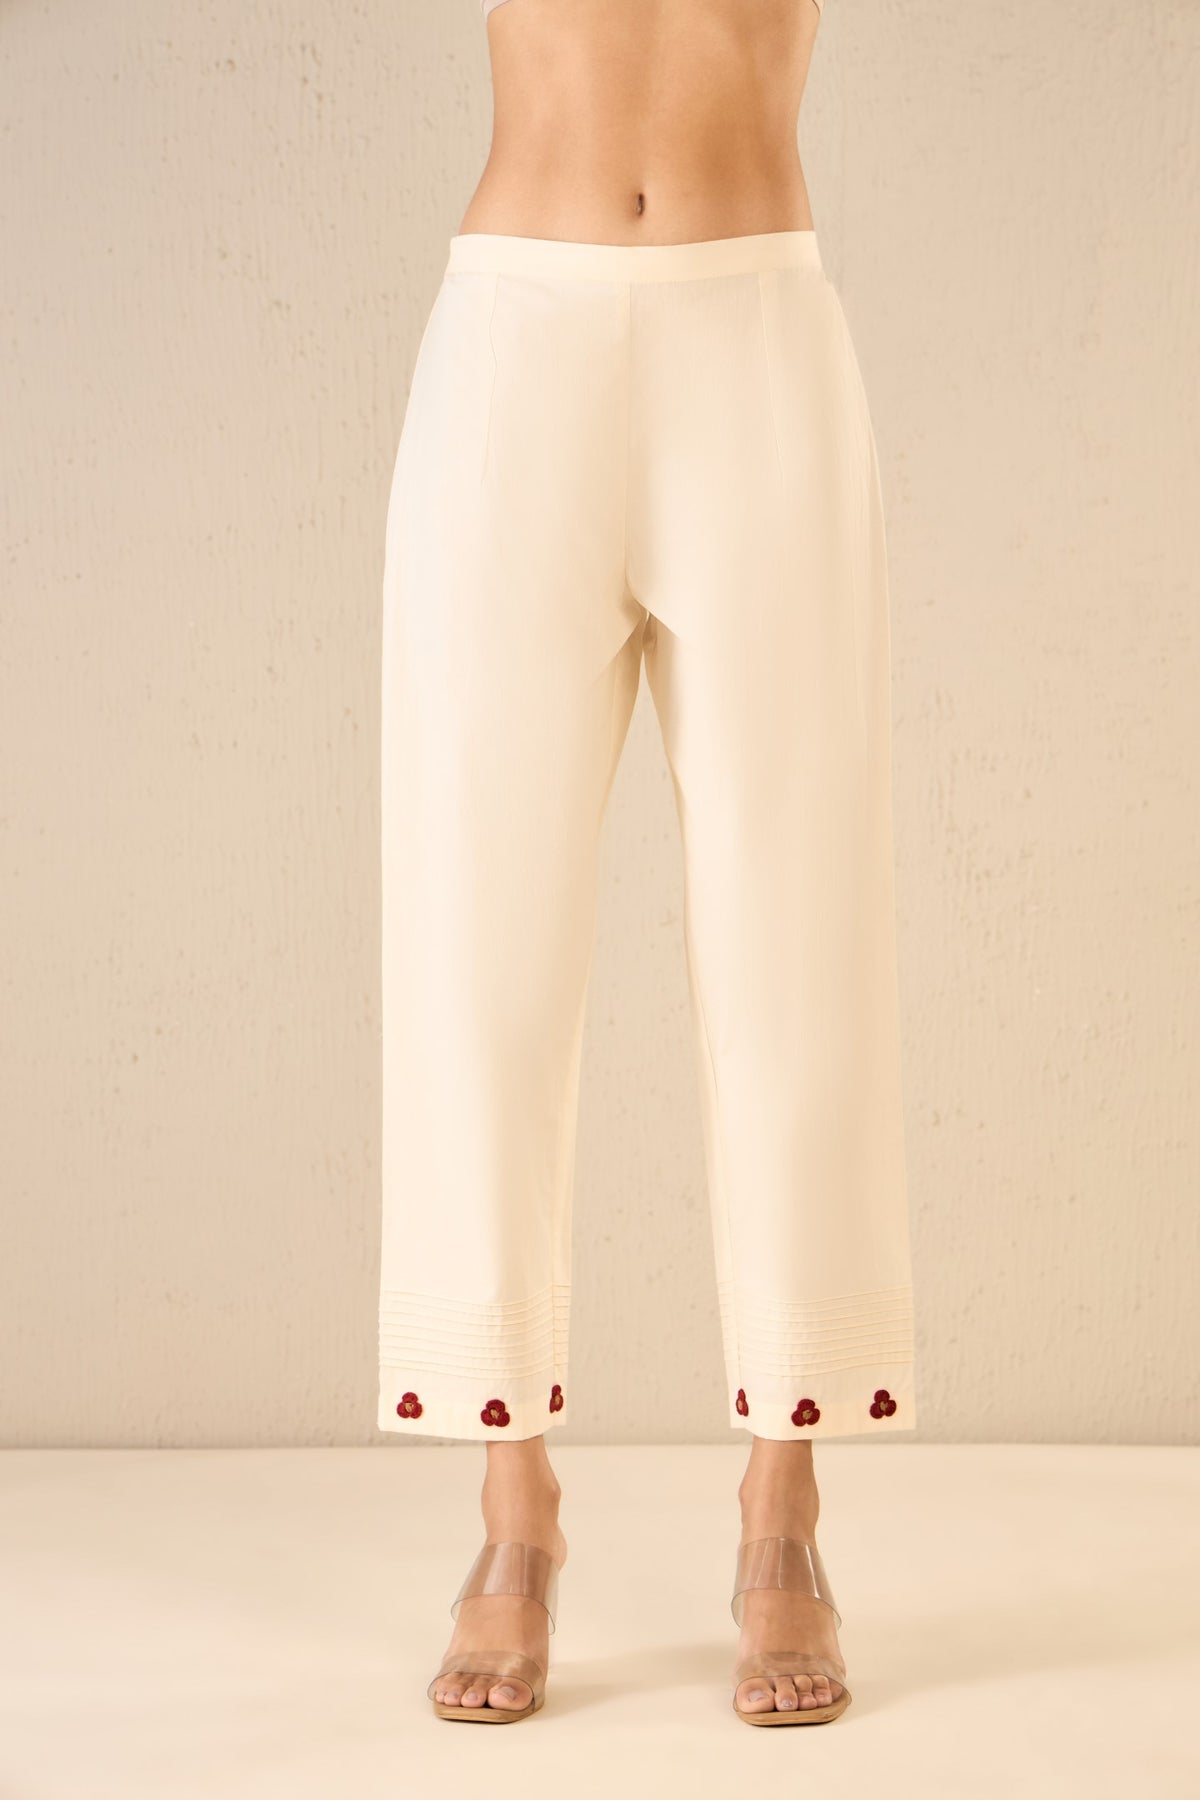 BLOOM DOTS: IVORY PINTUCK CROCHET FLORAL PANT